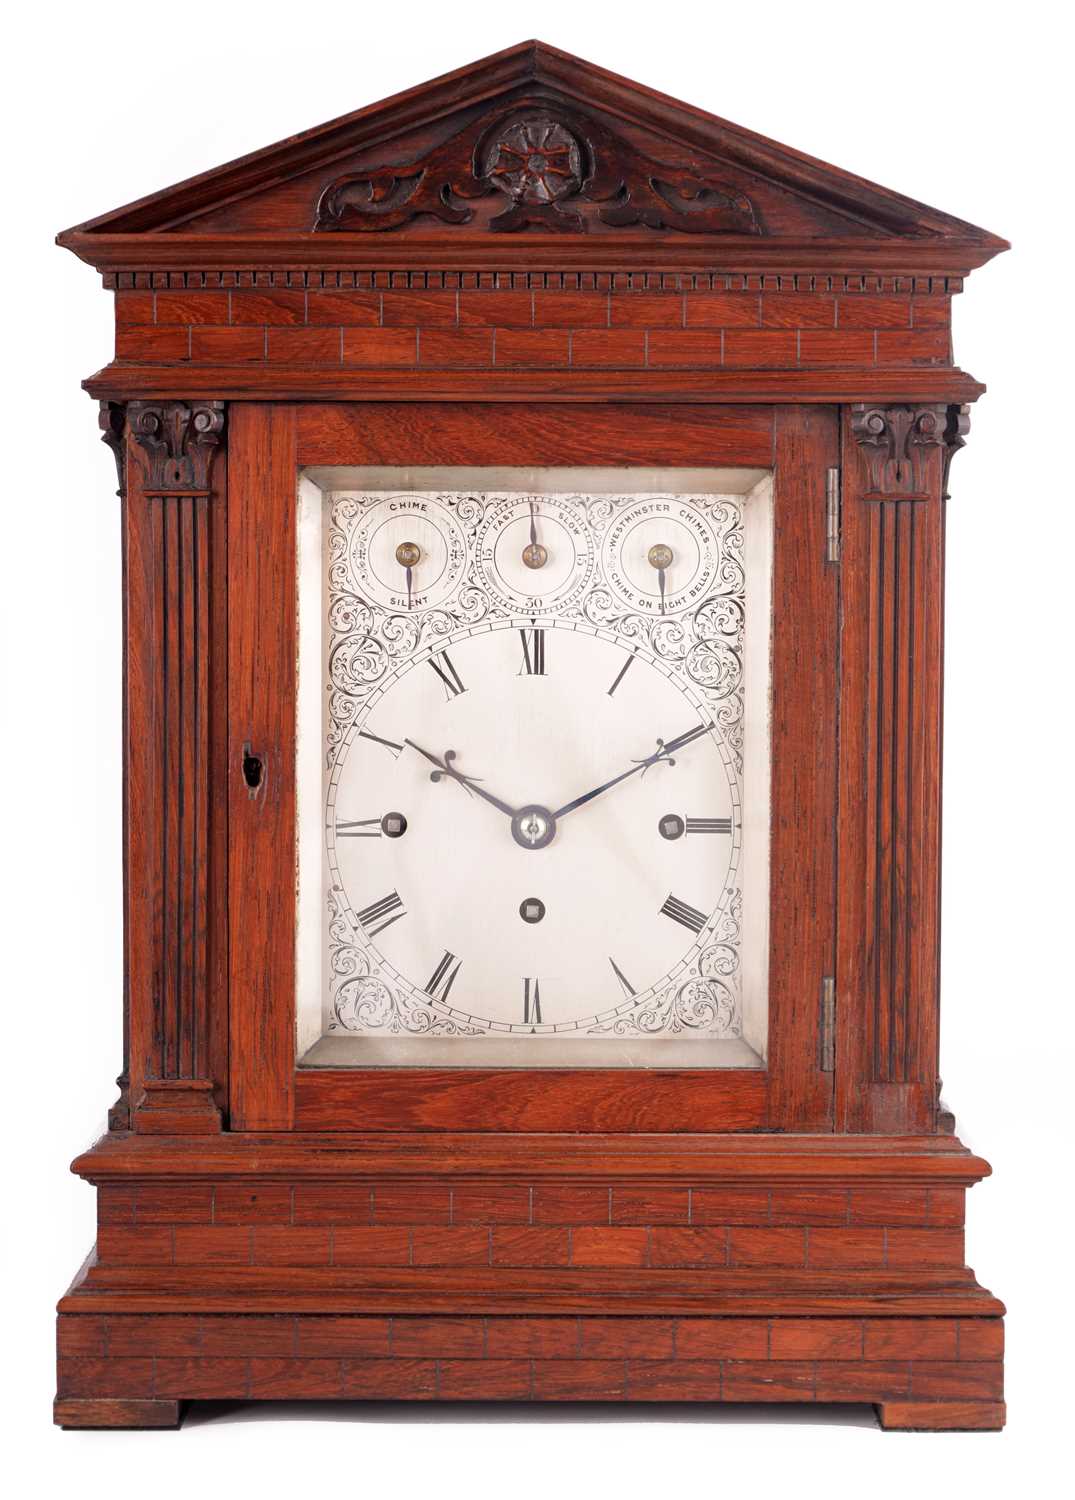 Lot 909 - A SMALL ENGLISH LATE 19TH CENTURY ROSEWOOD TRIPLE FUSEE EIGHT BELL QUARTER CHIMING BRACKET CLOCK